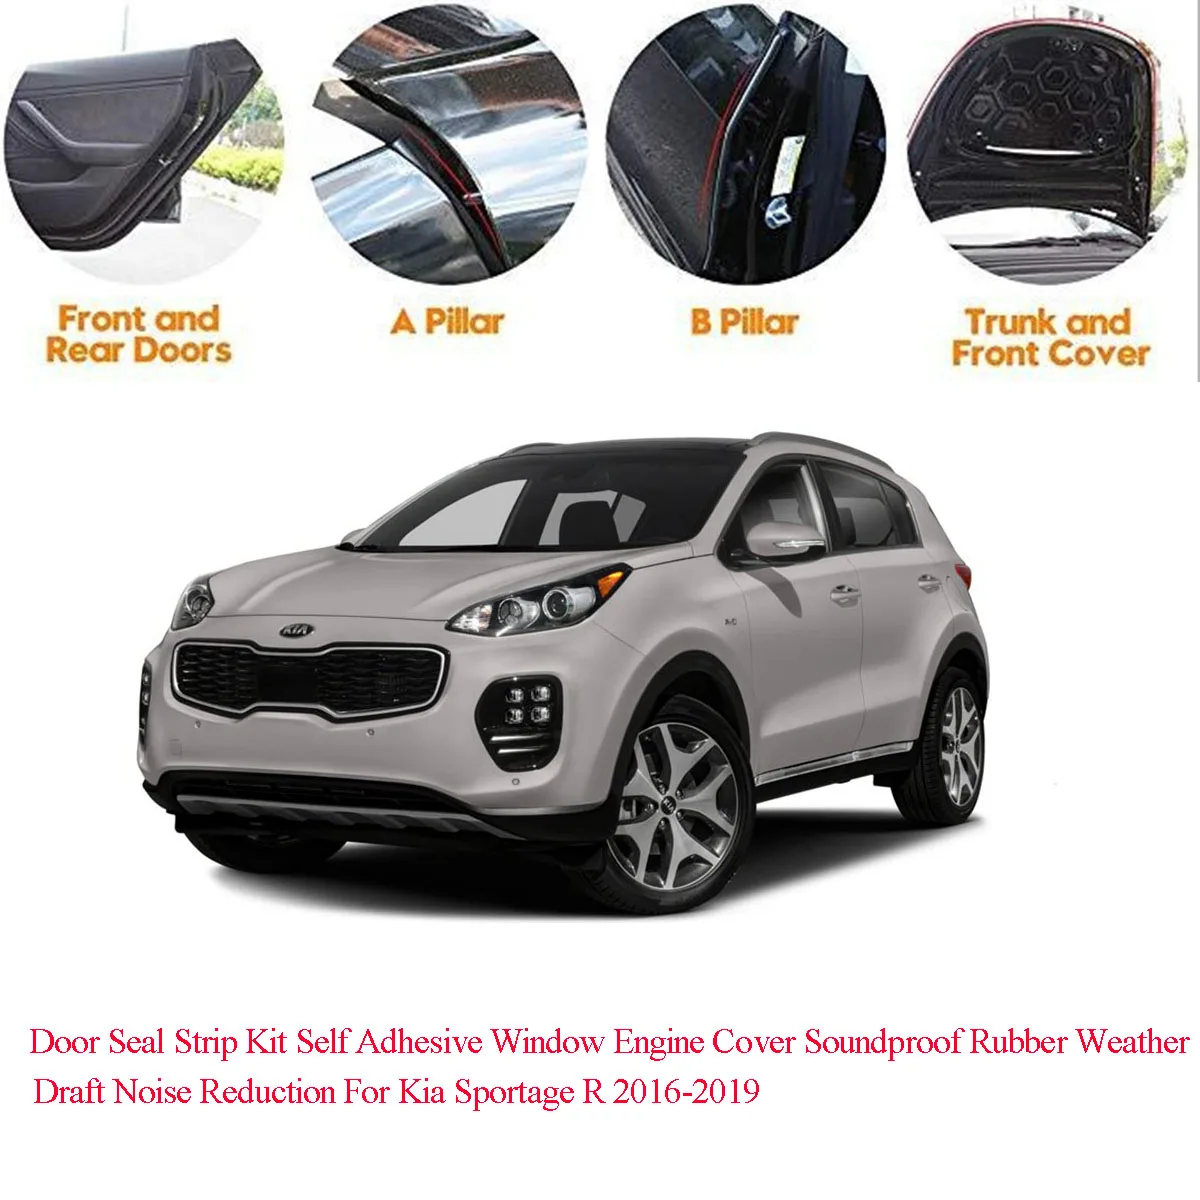 Door Seal Strip Kit Self Adhesive Window Engine Cover Soundproof Rubber Weather Draft Noise Reduction For Kia Sportage R 2016-21